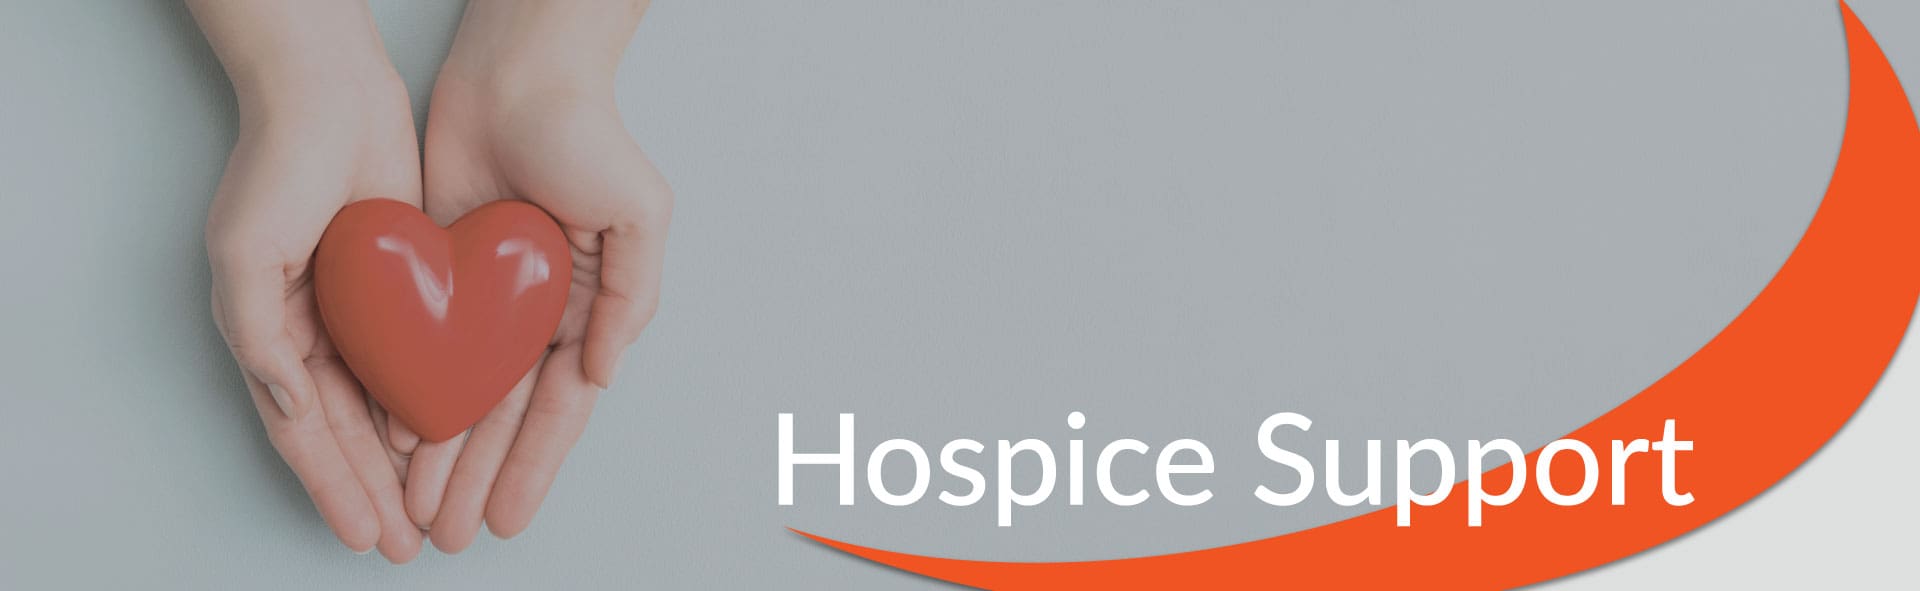 Hospice Support